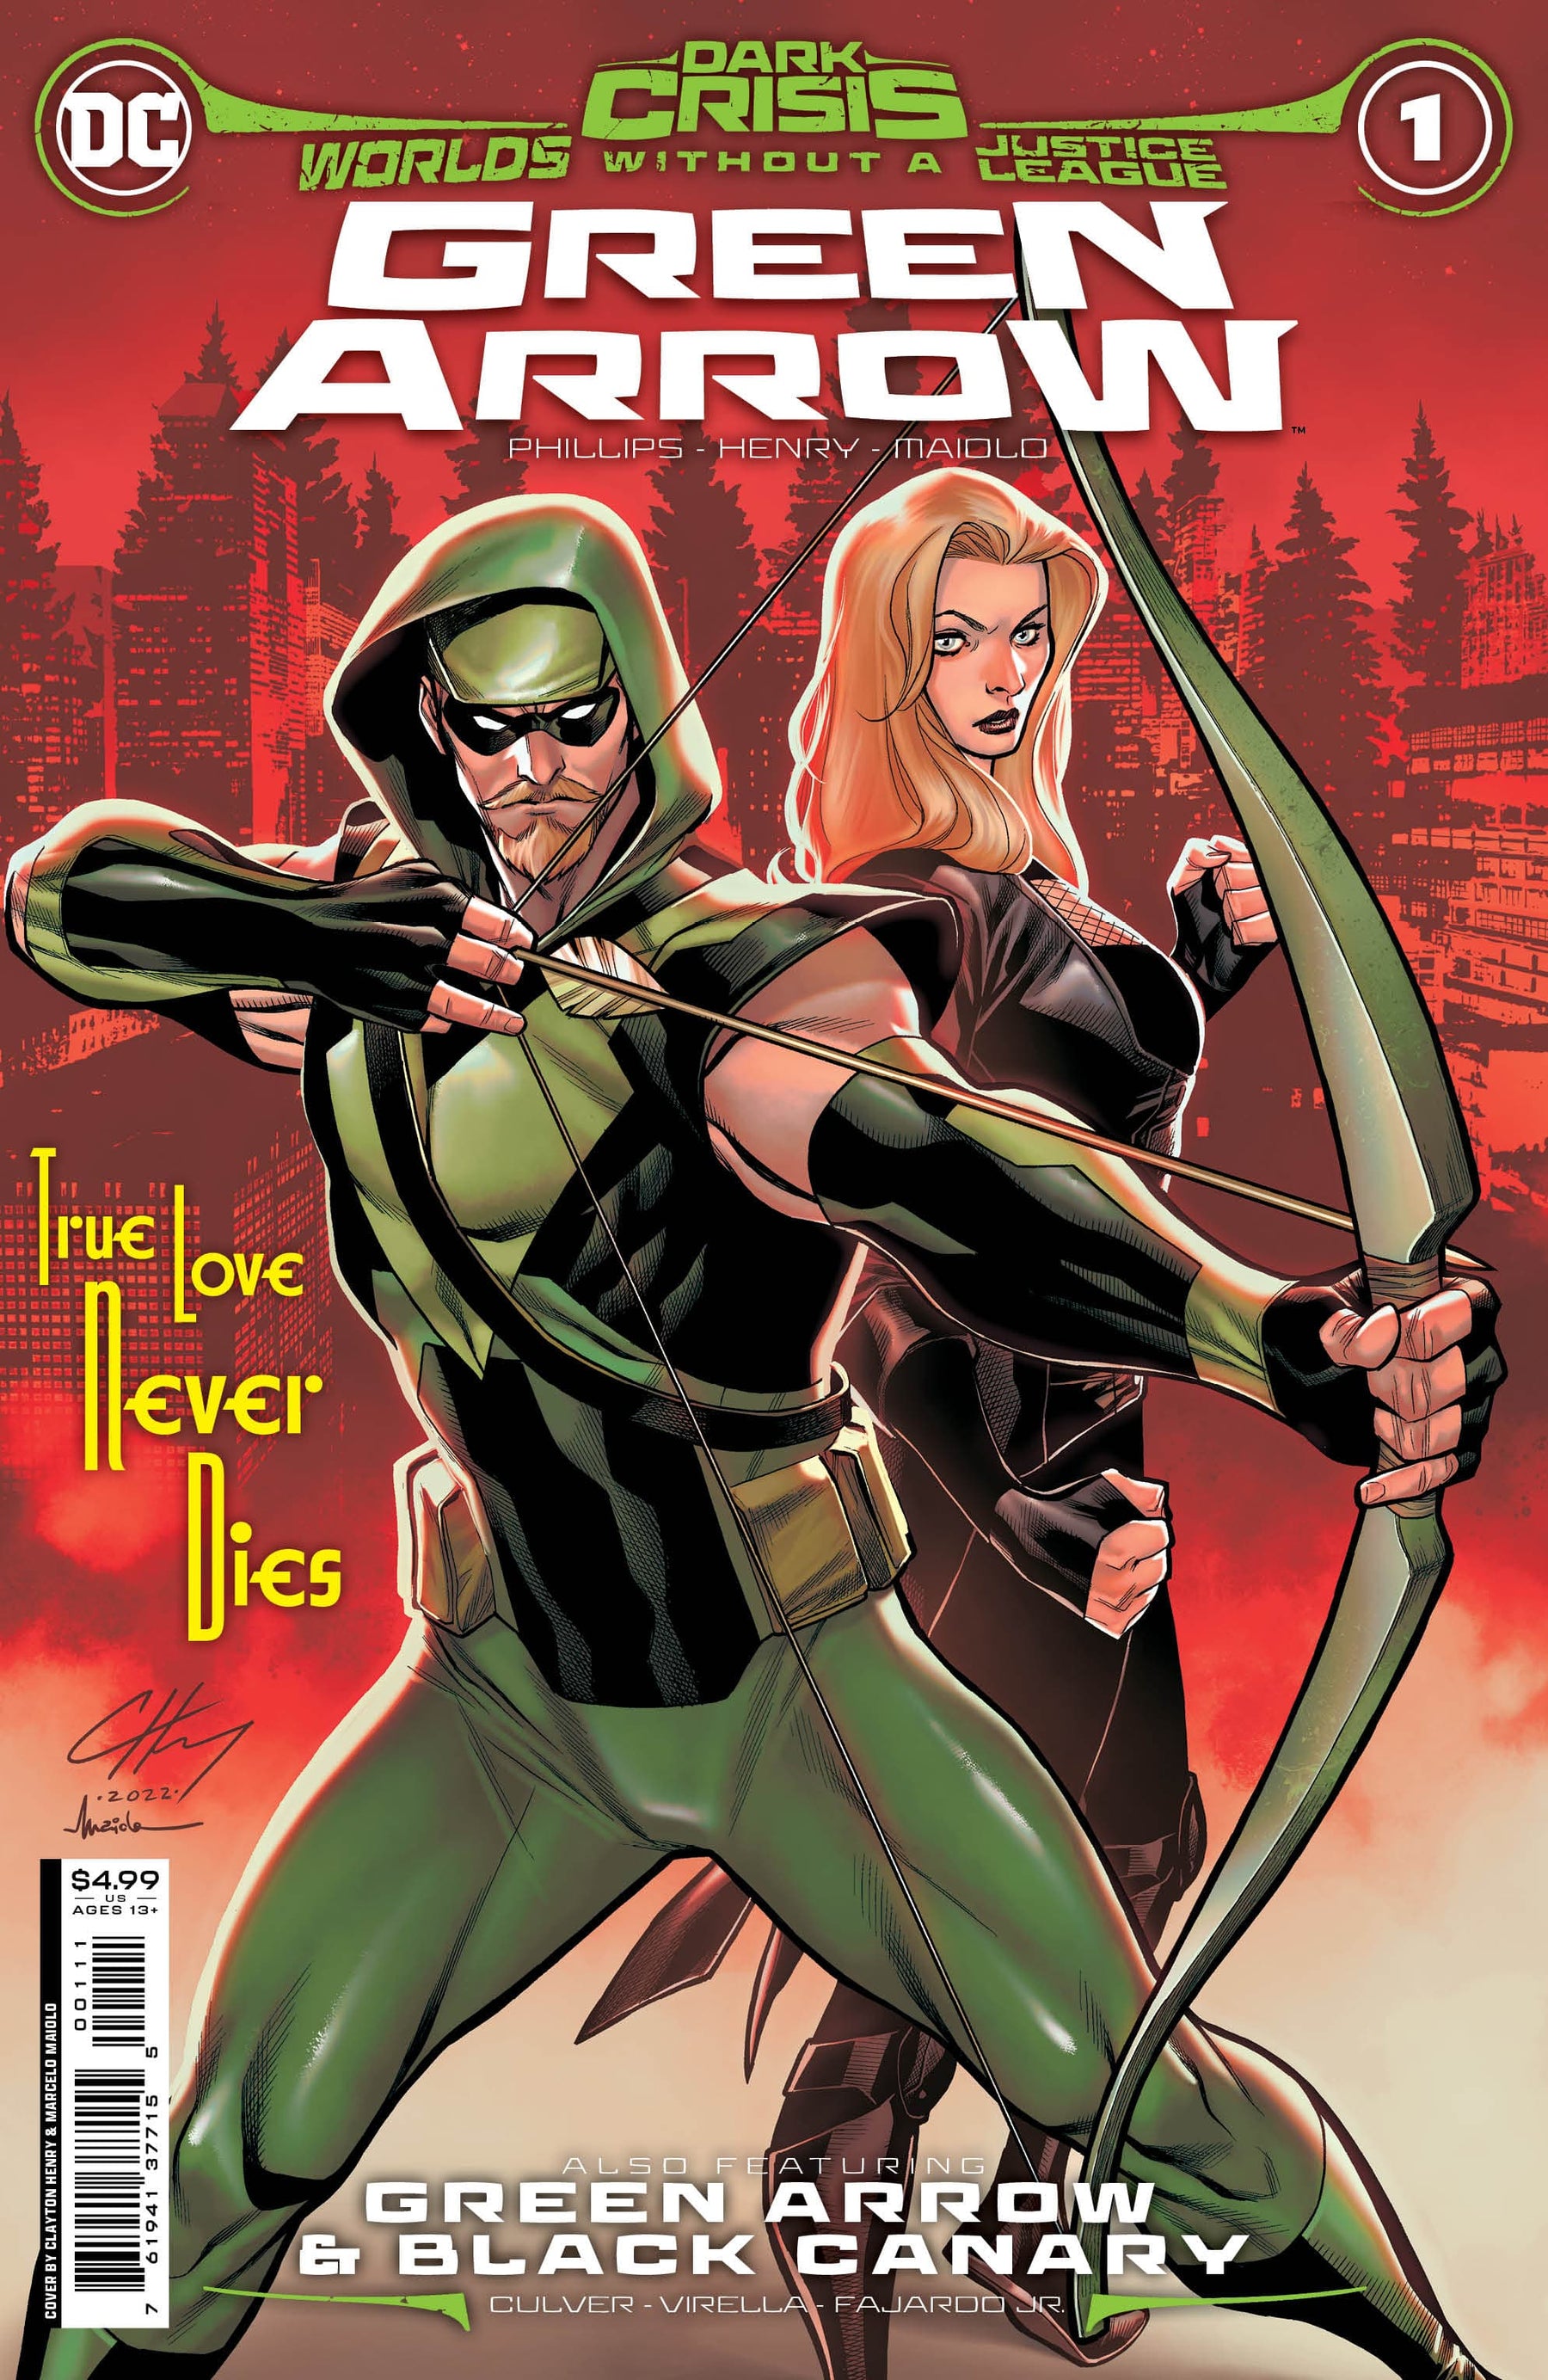 DARK CRISIS WORLDS WITHOUT A JUSTICE LEAGUE GREEN ARROW #1 (ONE SHOT) CVR A CLAYTON HENRY